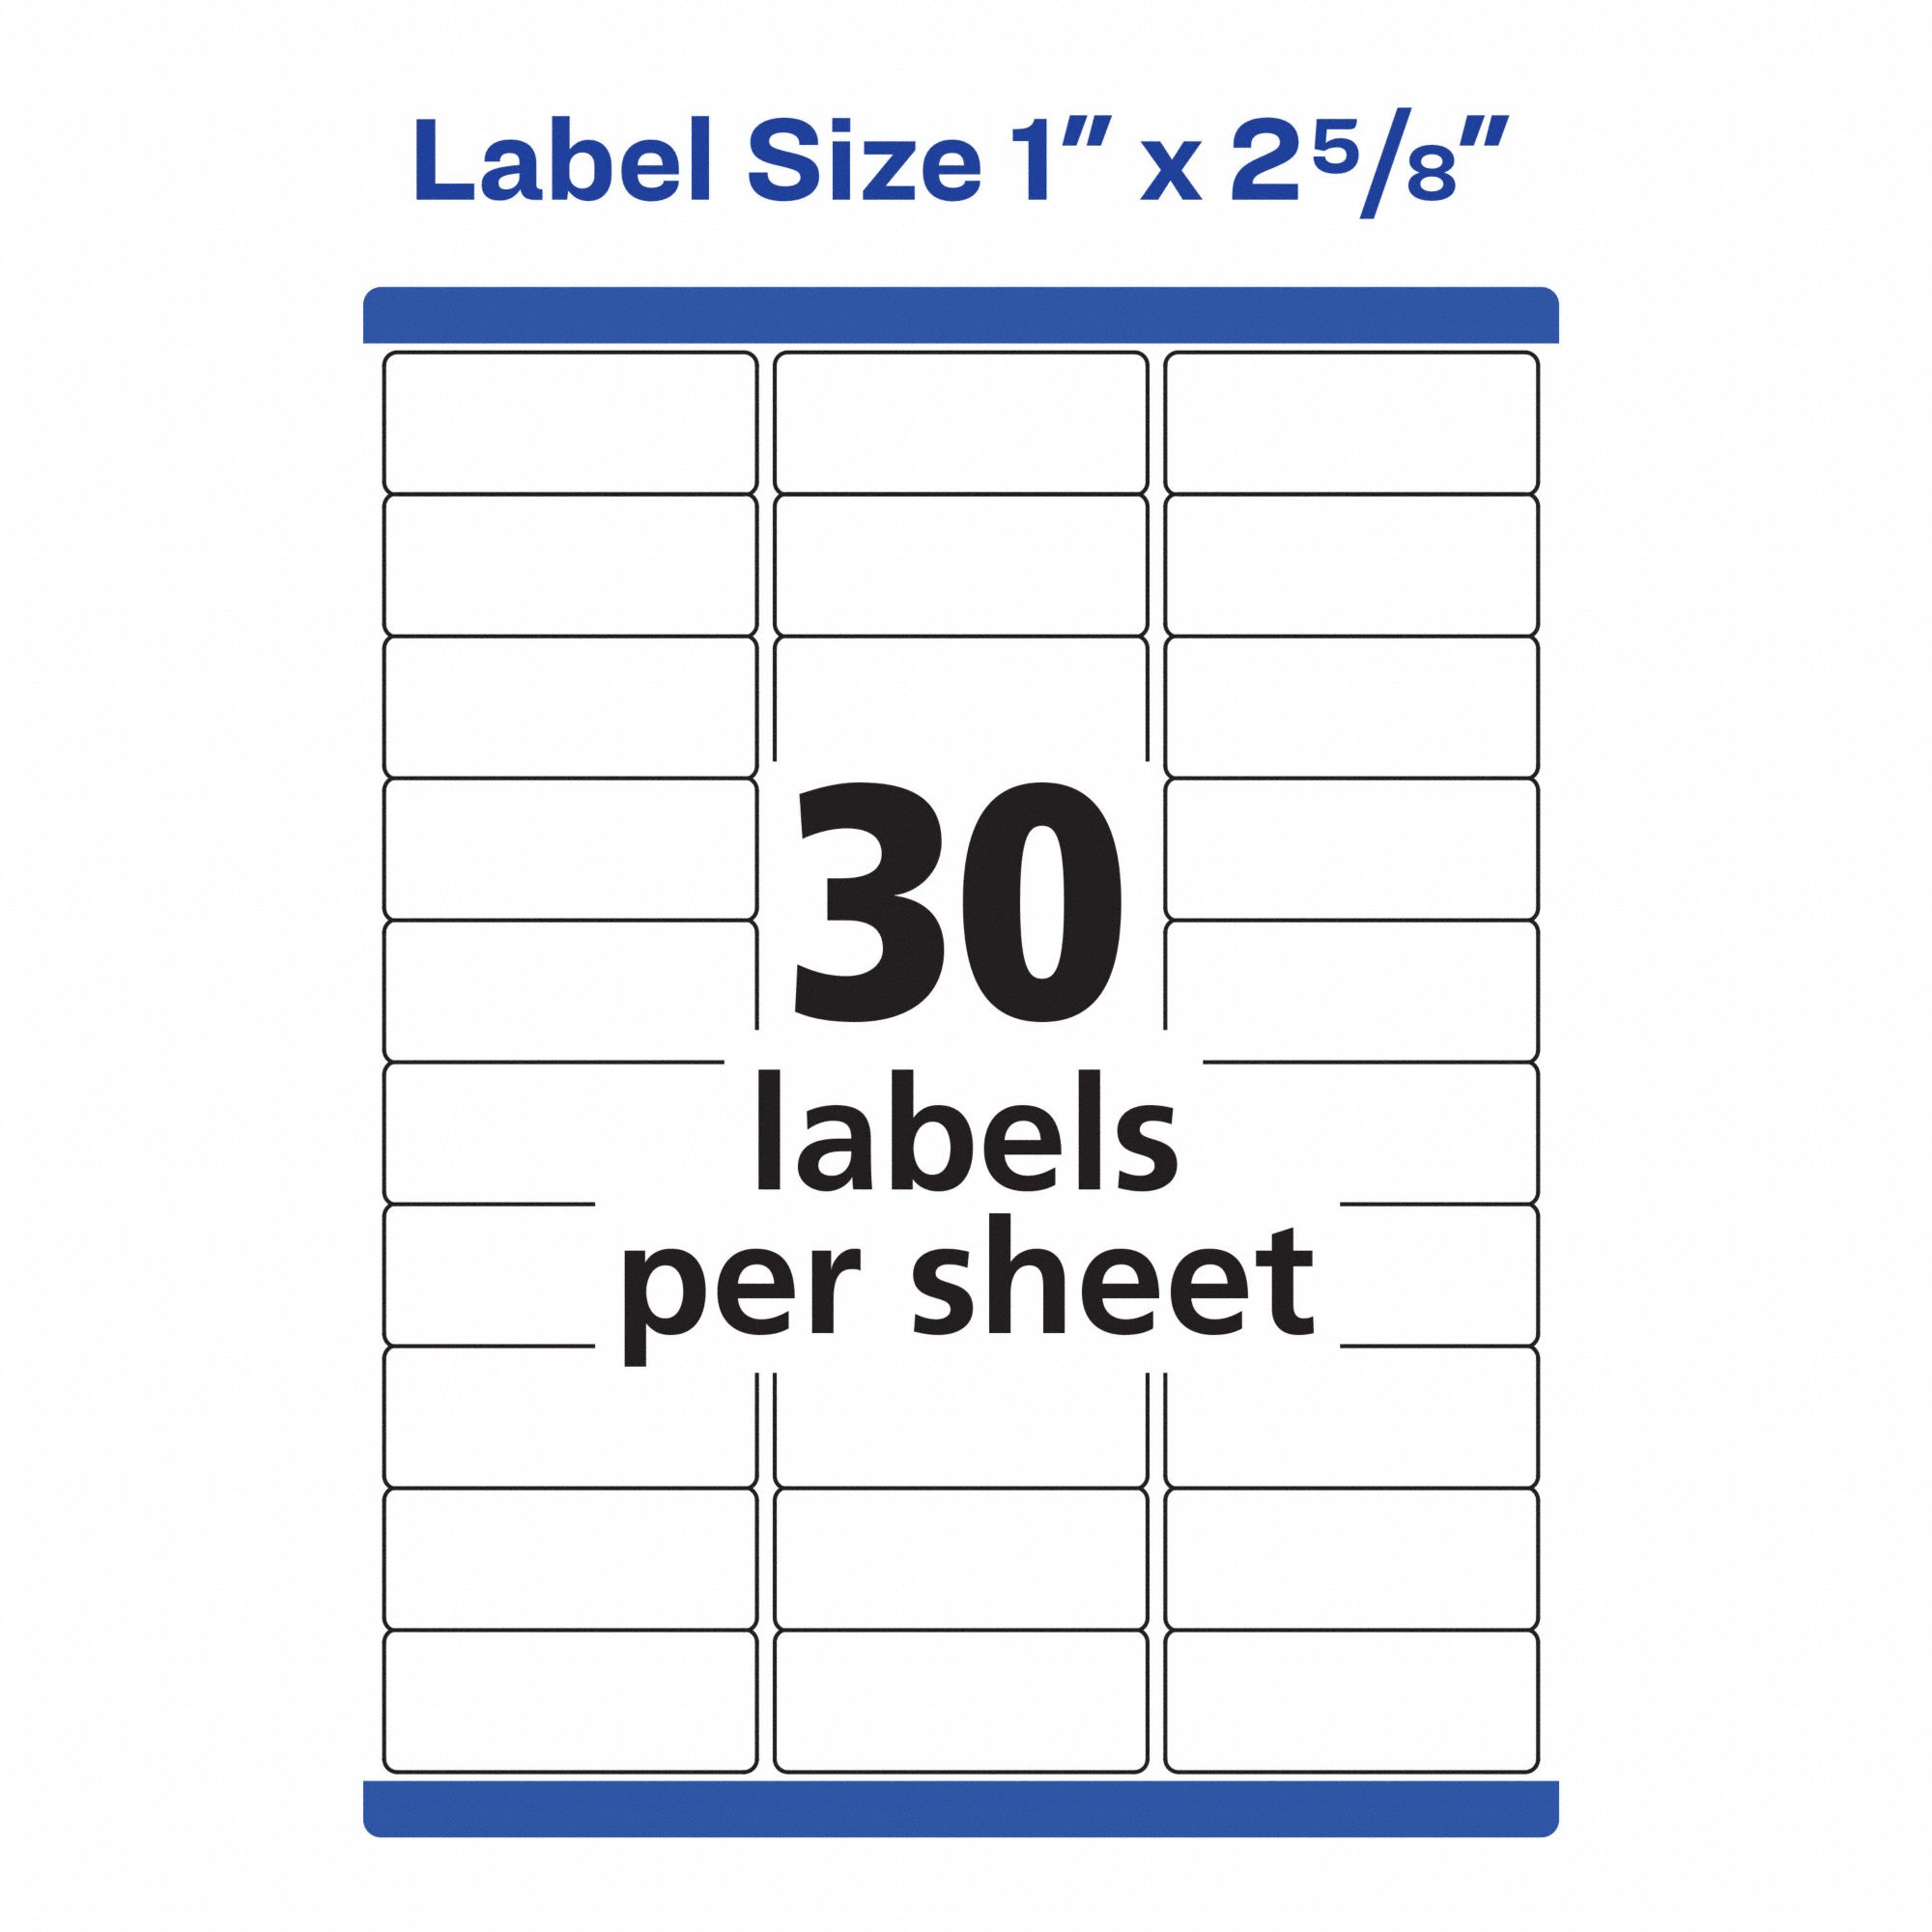 AVERY Laser Label 5,520 Avery Template , White, 1 in Label Ht, 2 5/8